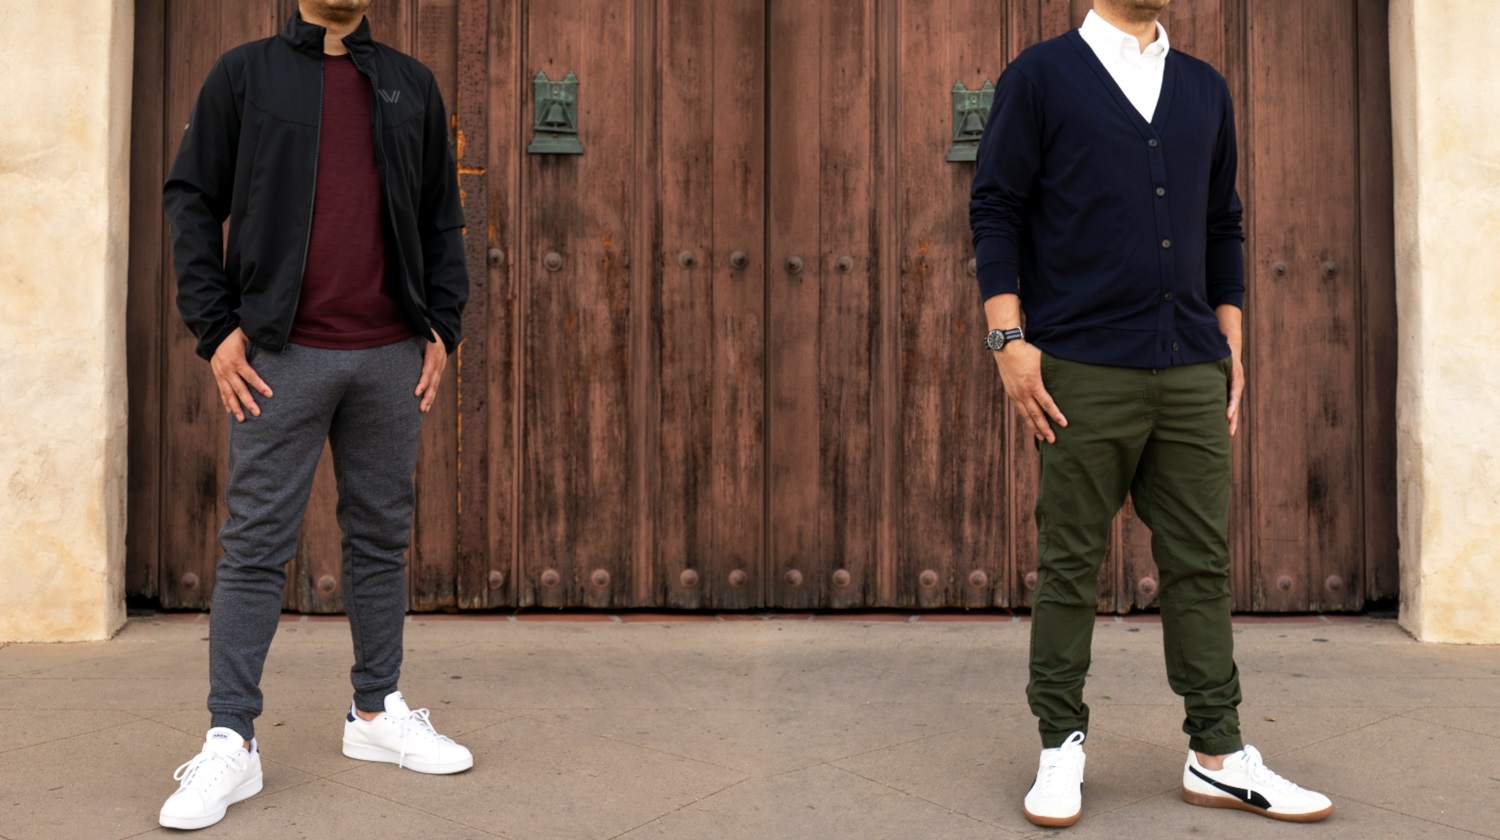 7 Sweatpants Outfits That Look Stylish, Not Sloppy